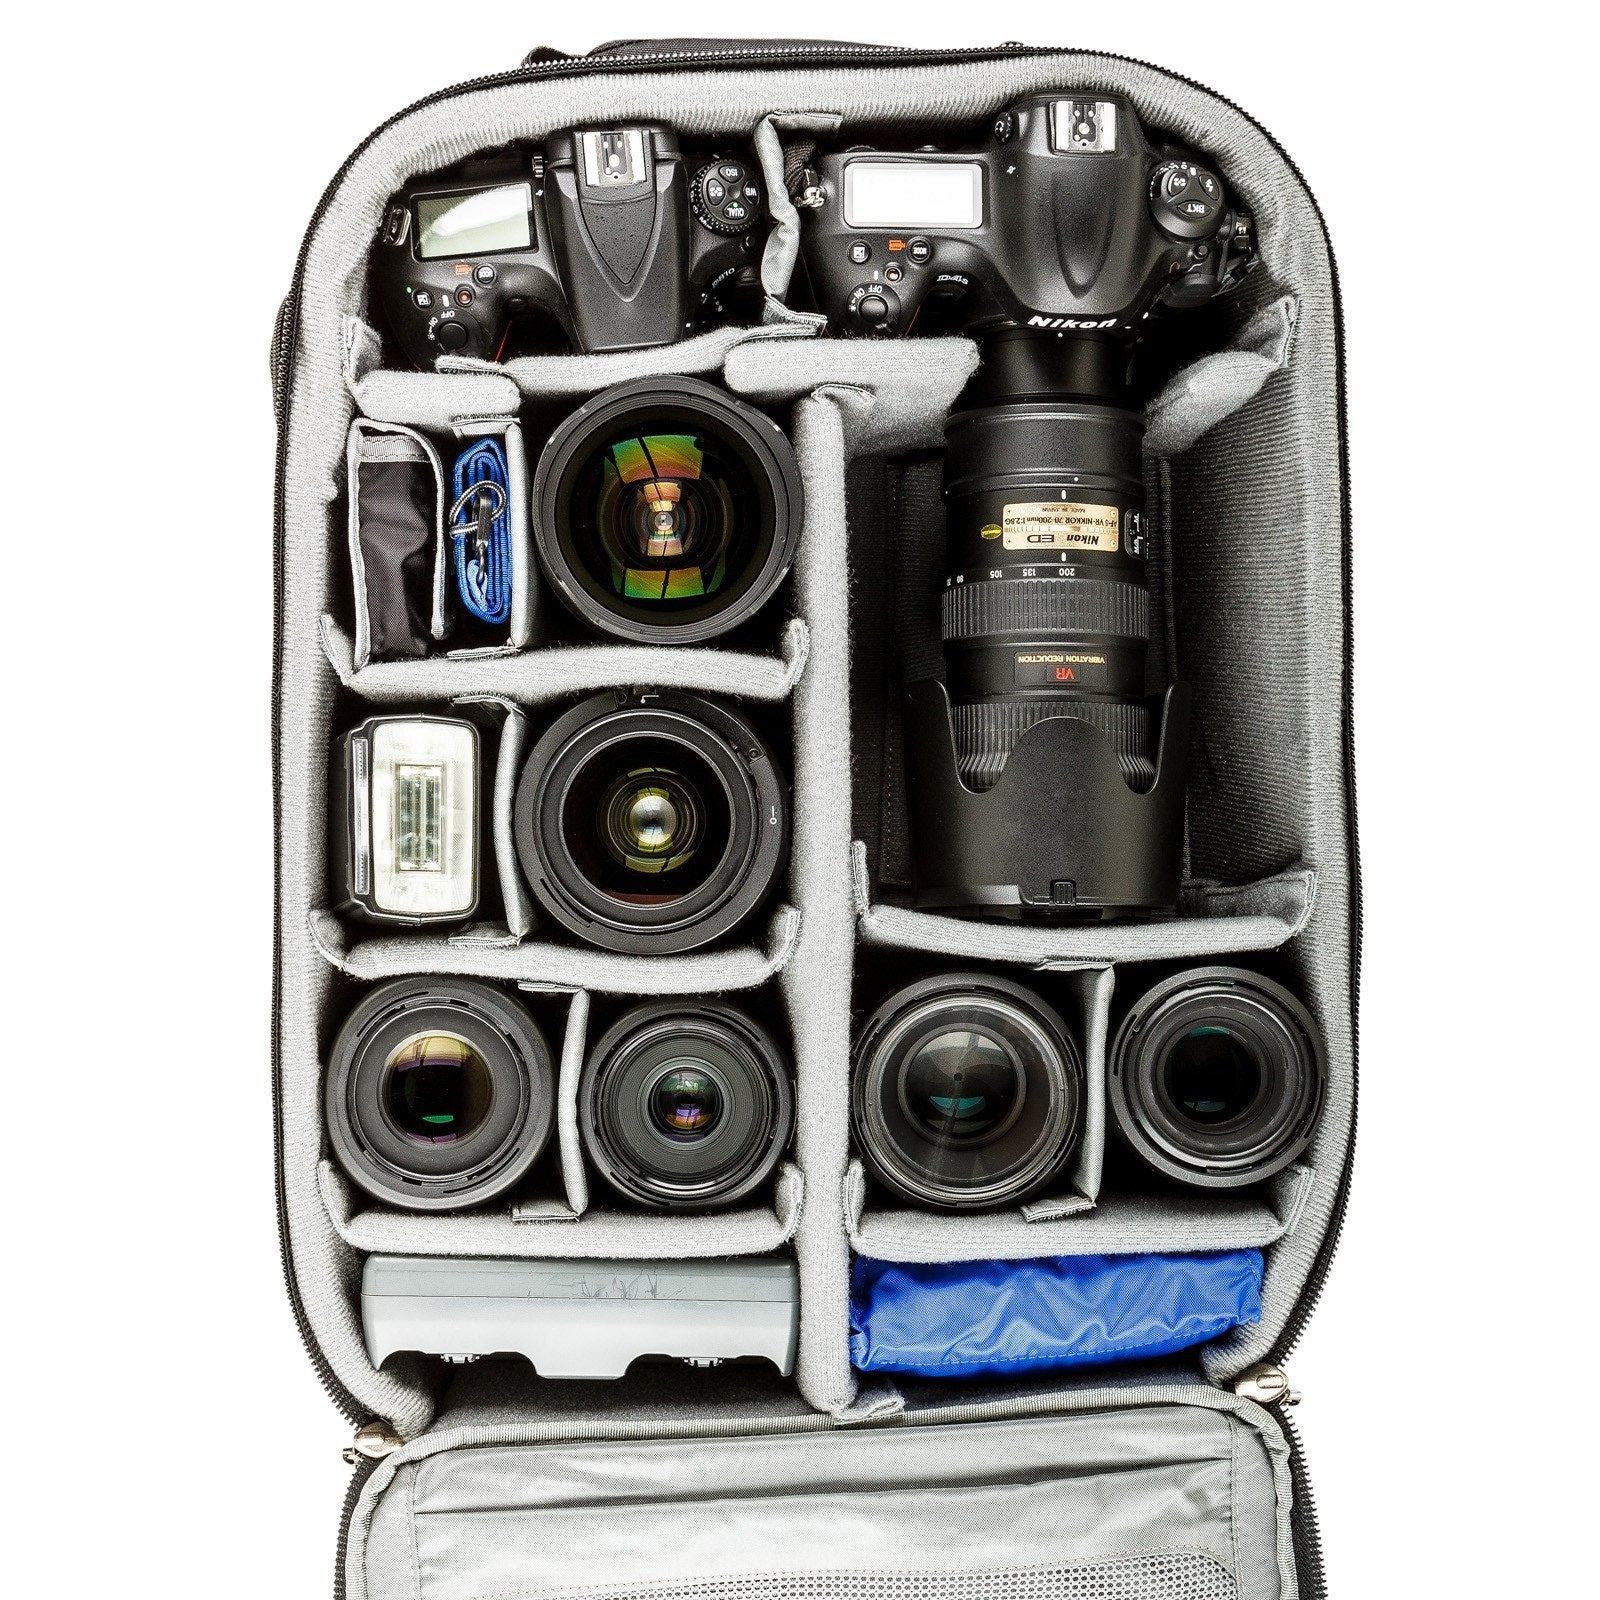 Two gripped DSLRs with seven lenses and a flash